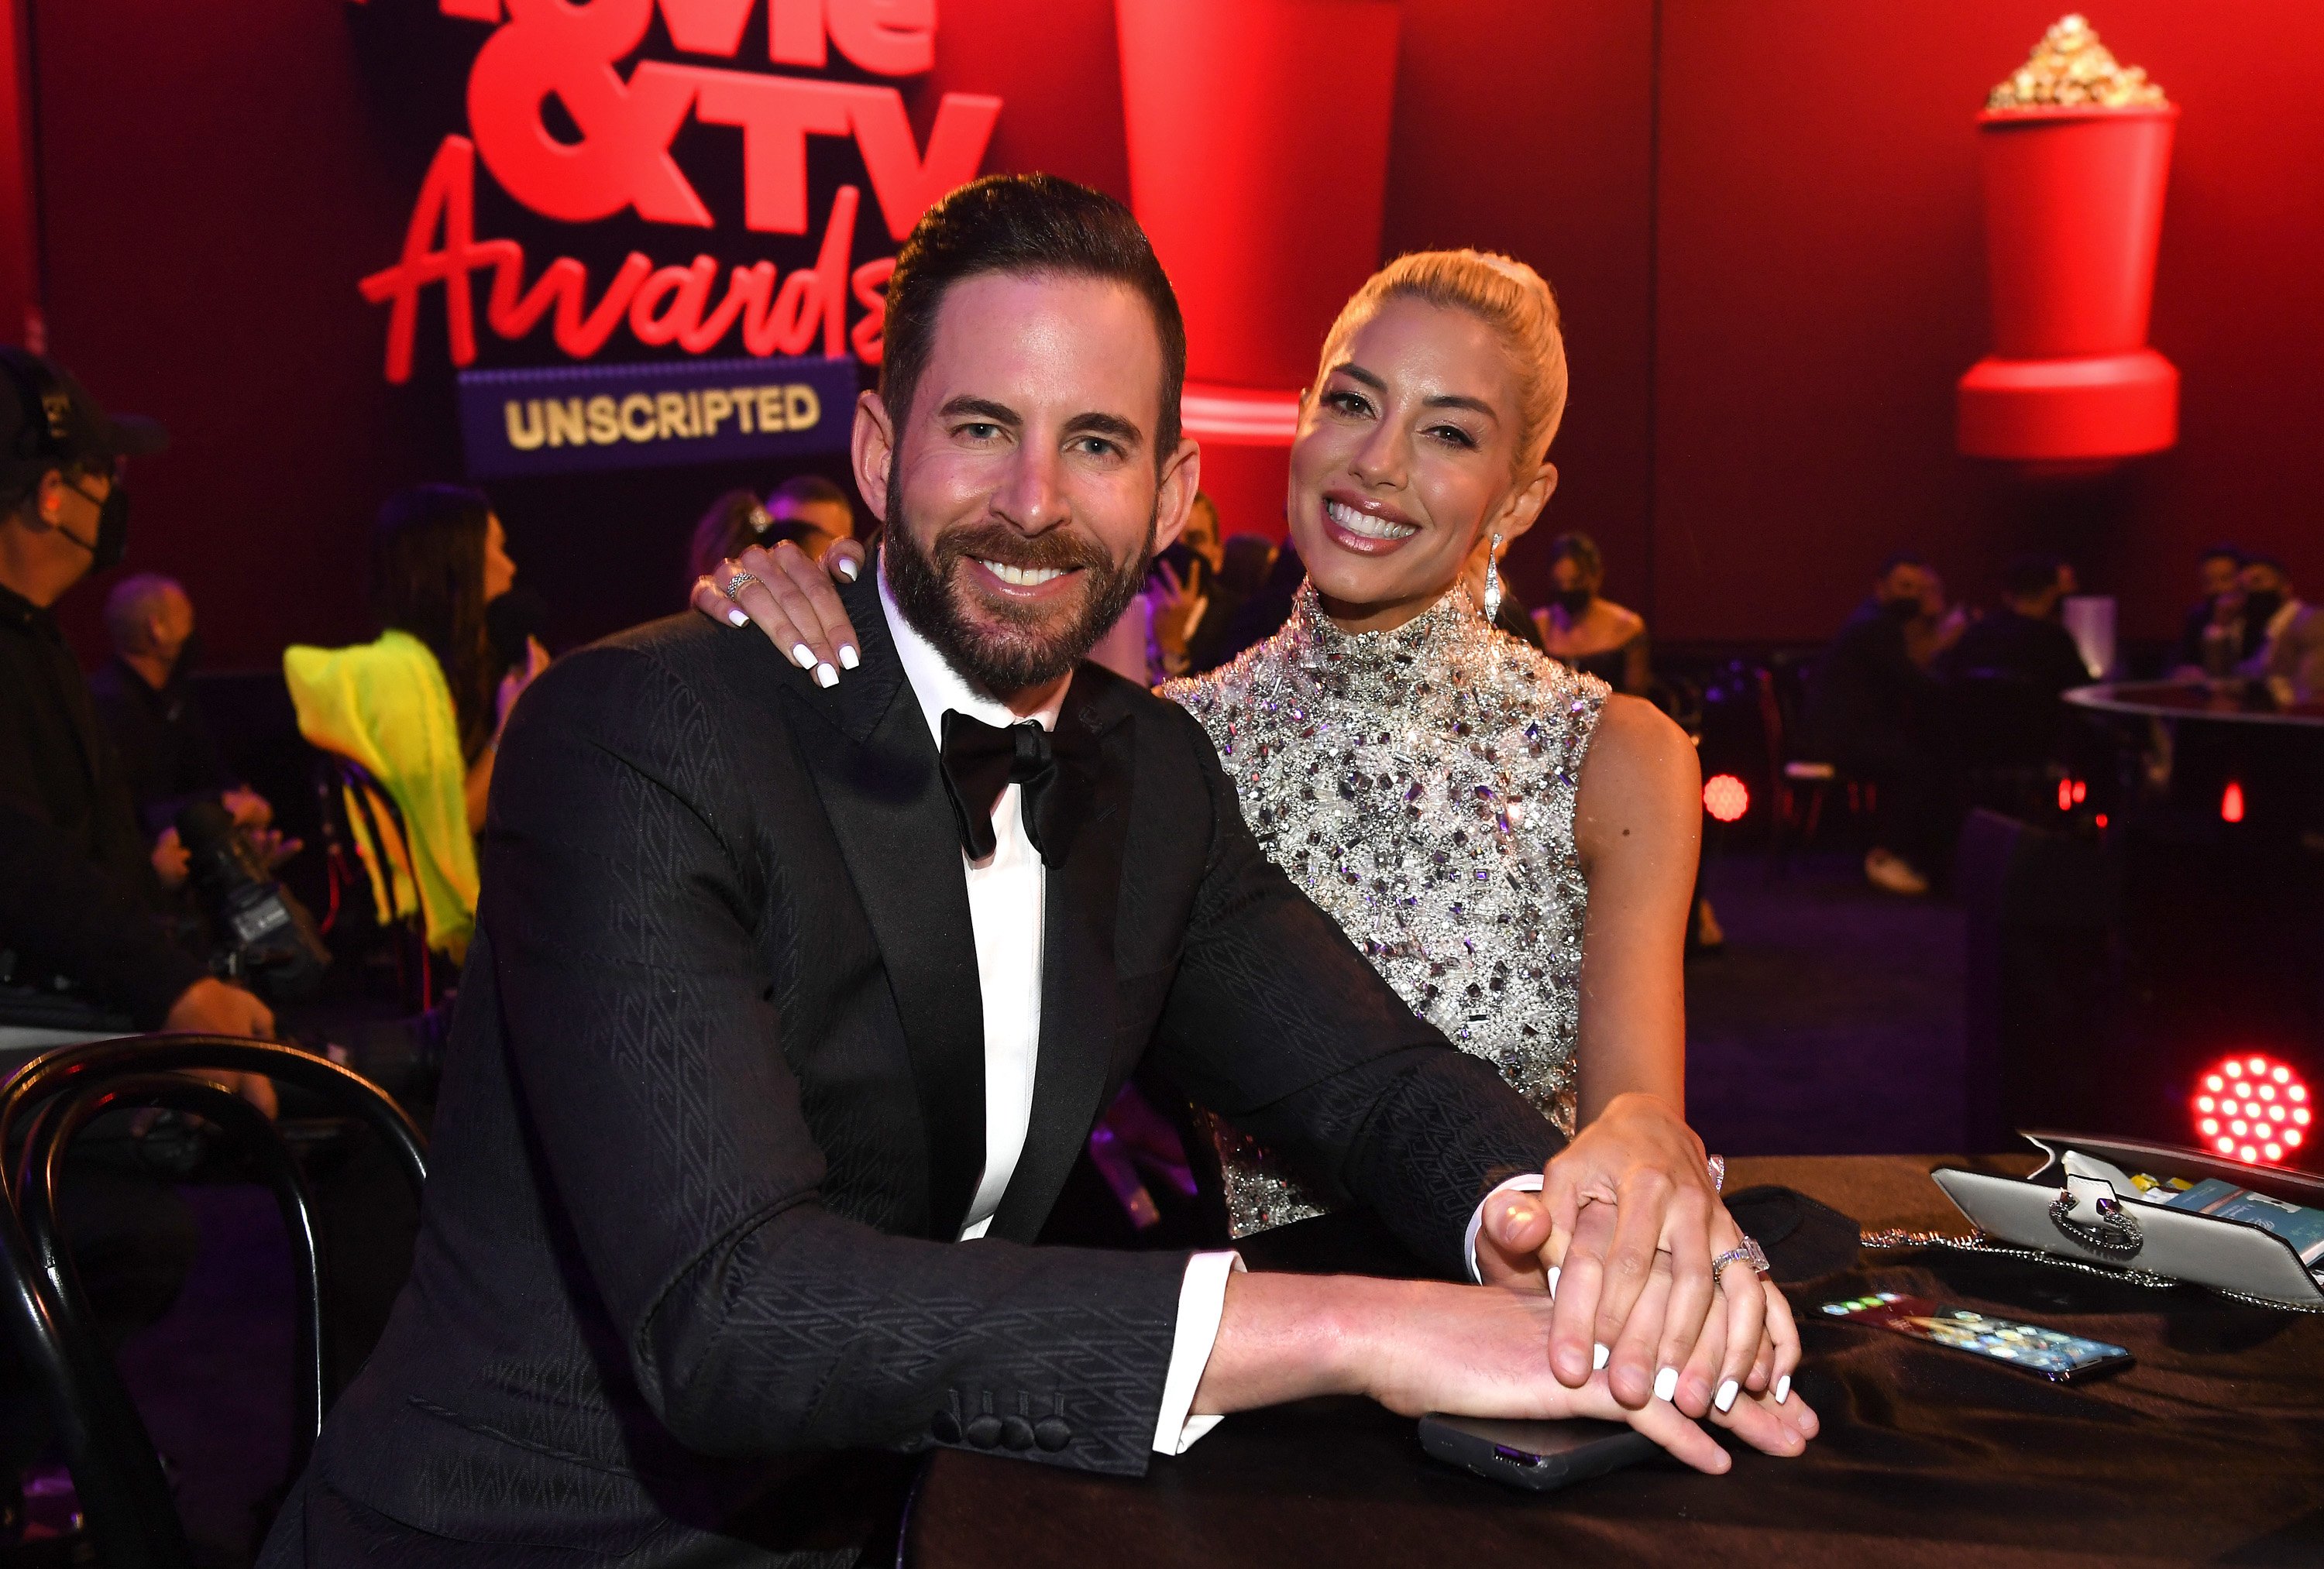 Tarek El Moussa and Heather Rae Young attend the 2021 MTV Movie & TV Awards: UNSCRIPTED in Los Angeles, California